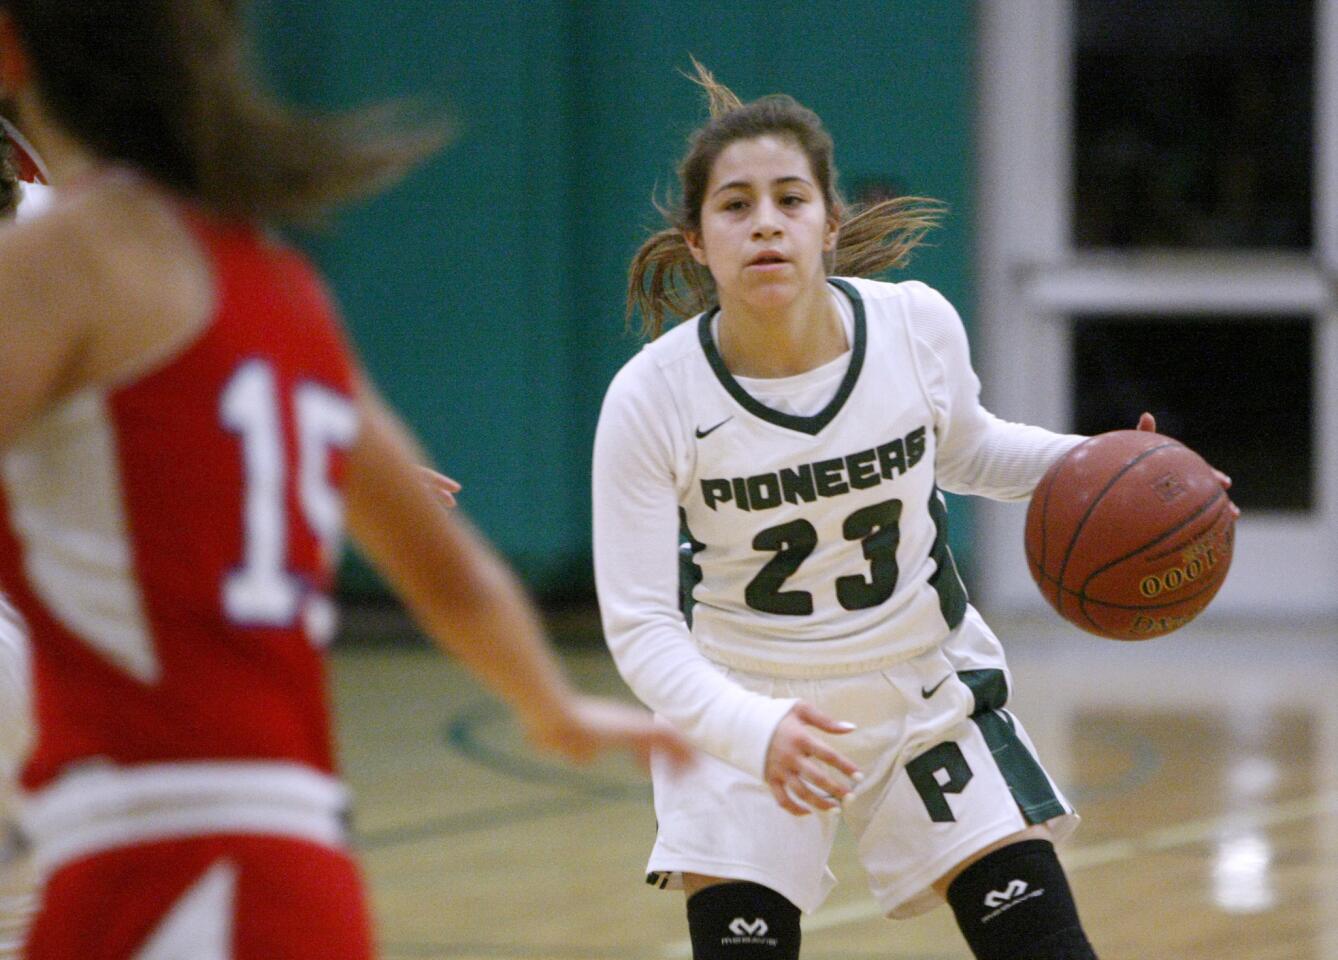 Providence High School girls basketball player #23 Ariel Gordillo yo-yos up and down while waiting for someone to open up for a pass in game vs. Bell-Jeff High School at the Providence Pioneer Showcase in Burbank on Saturday, Jan. 7, 2017.